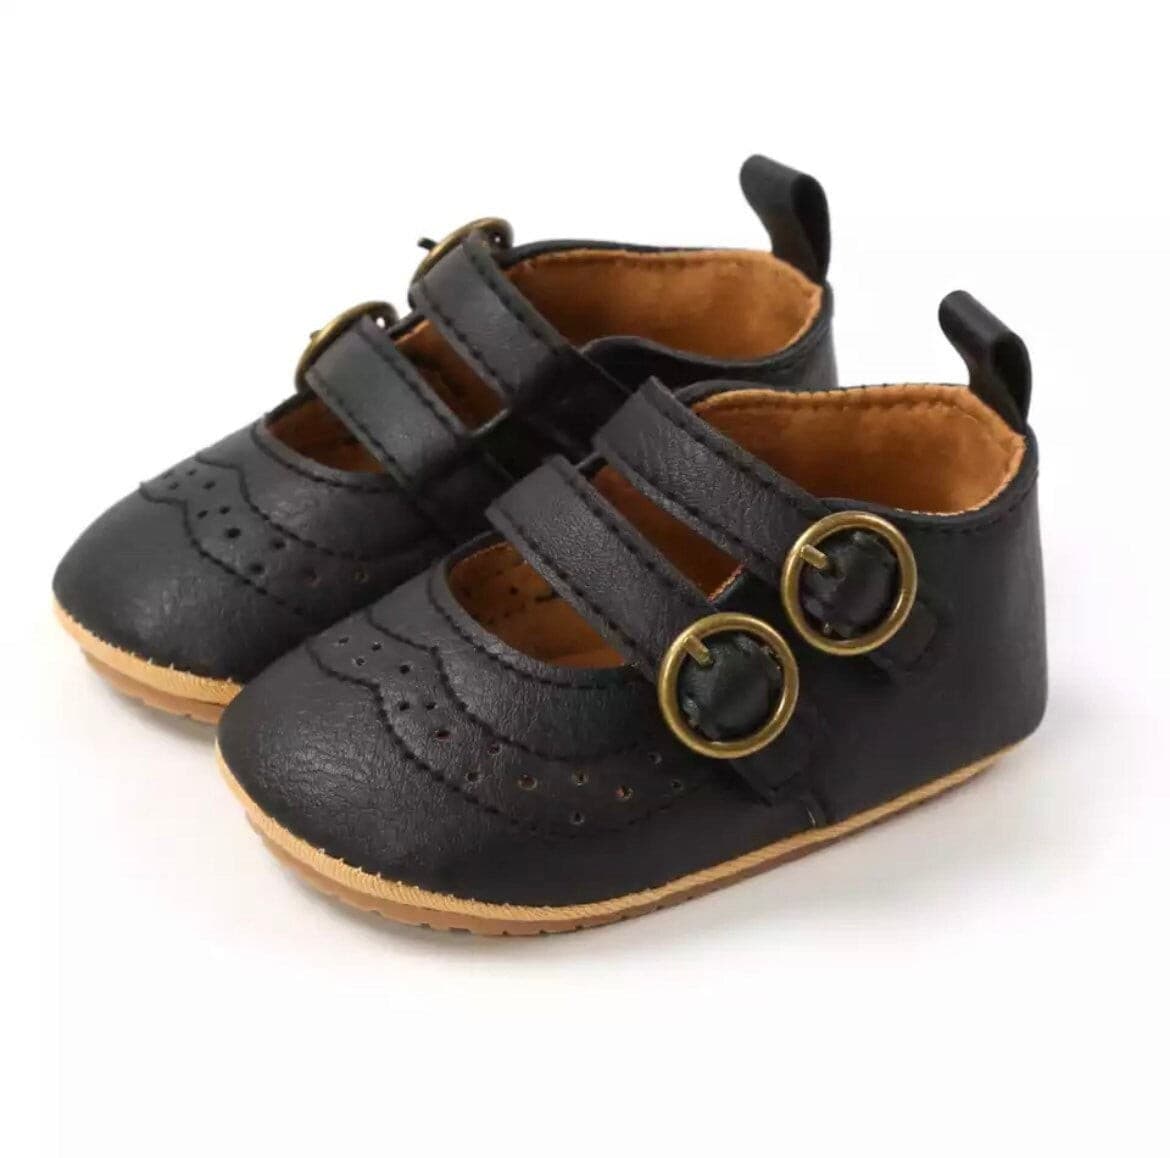 Lou - Baby Mary Janes First Walker Shoes-Thank you for visiting my store! Gorgeous Baby Mary Janes First Walker Shoes in size newborn to 18 months.This is great little shoe and is very popular for all speci-Bijou Bubs